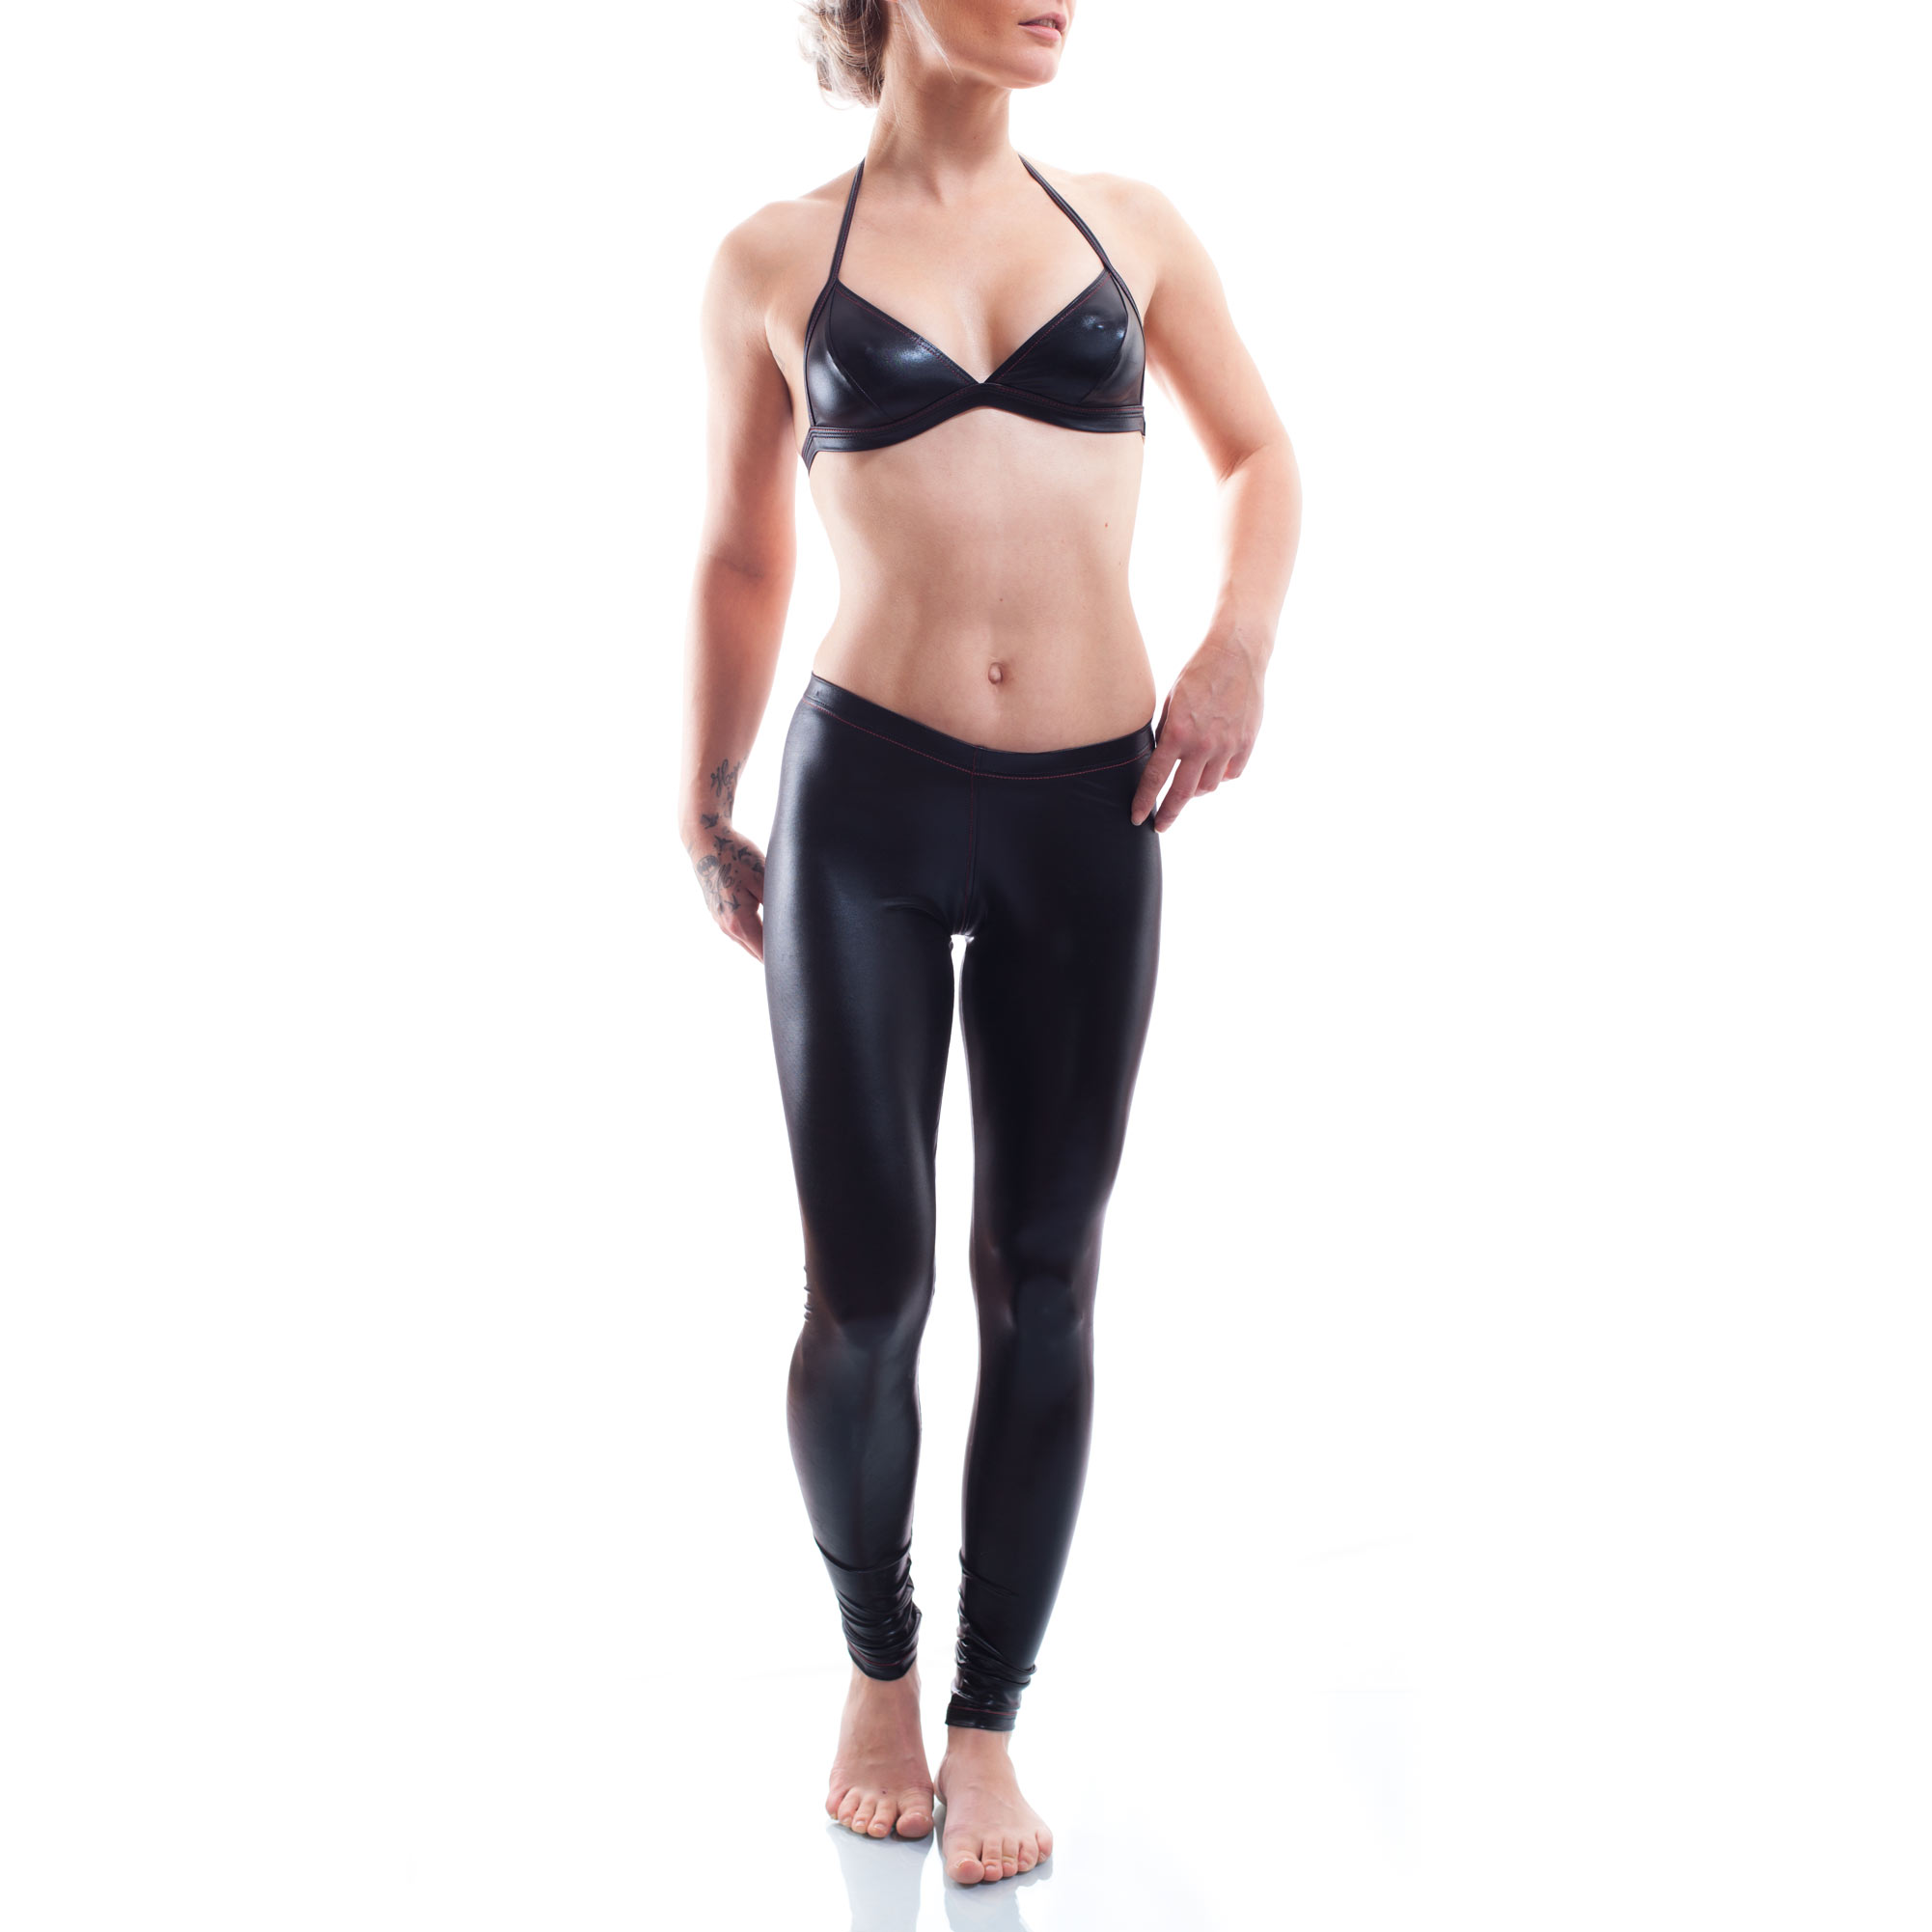 Live production, because the WetJeans Womens Leggings 381F50 in Wetlook will be produced just for you on demand.

Sizes

Available in Sizes S, M, L, XL

Material composition

Wetlook: 93% Polyamid, 7% Elasthan

Particularities

LIVE product |  perfect super elastic clubwear | gloss-finish | deep black…